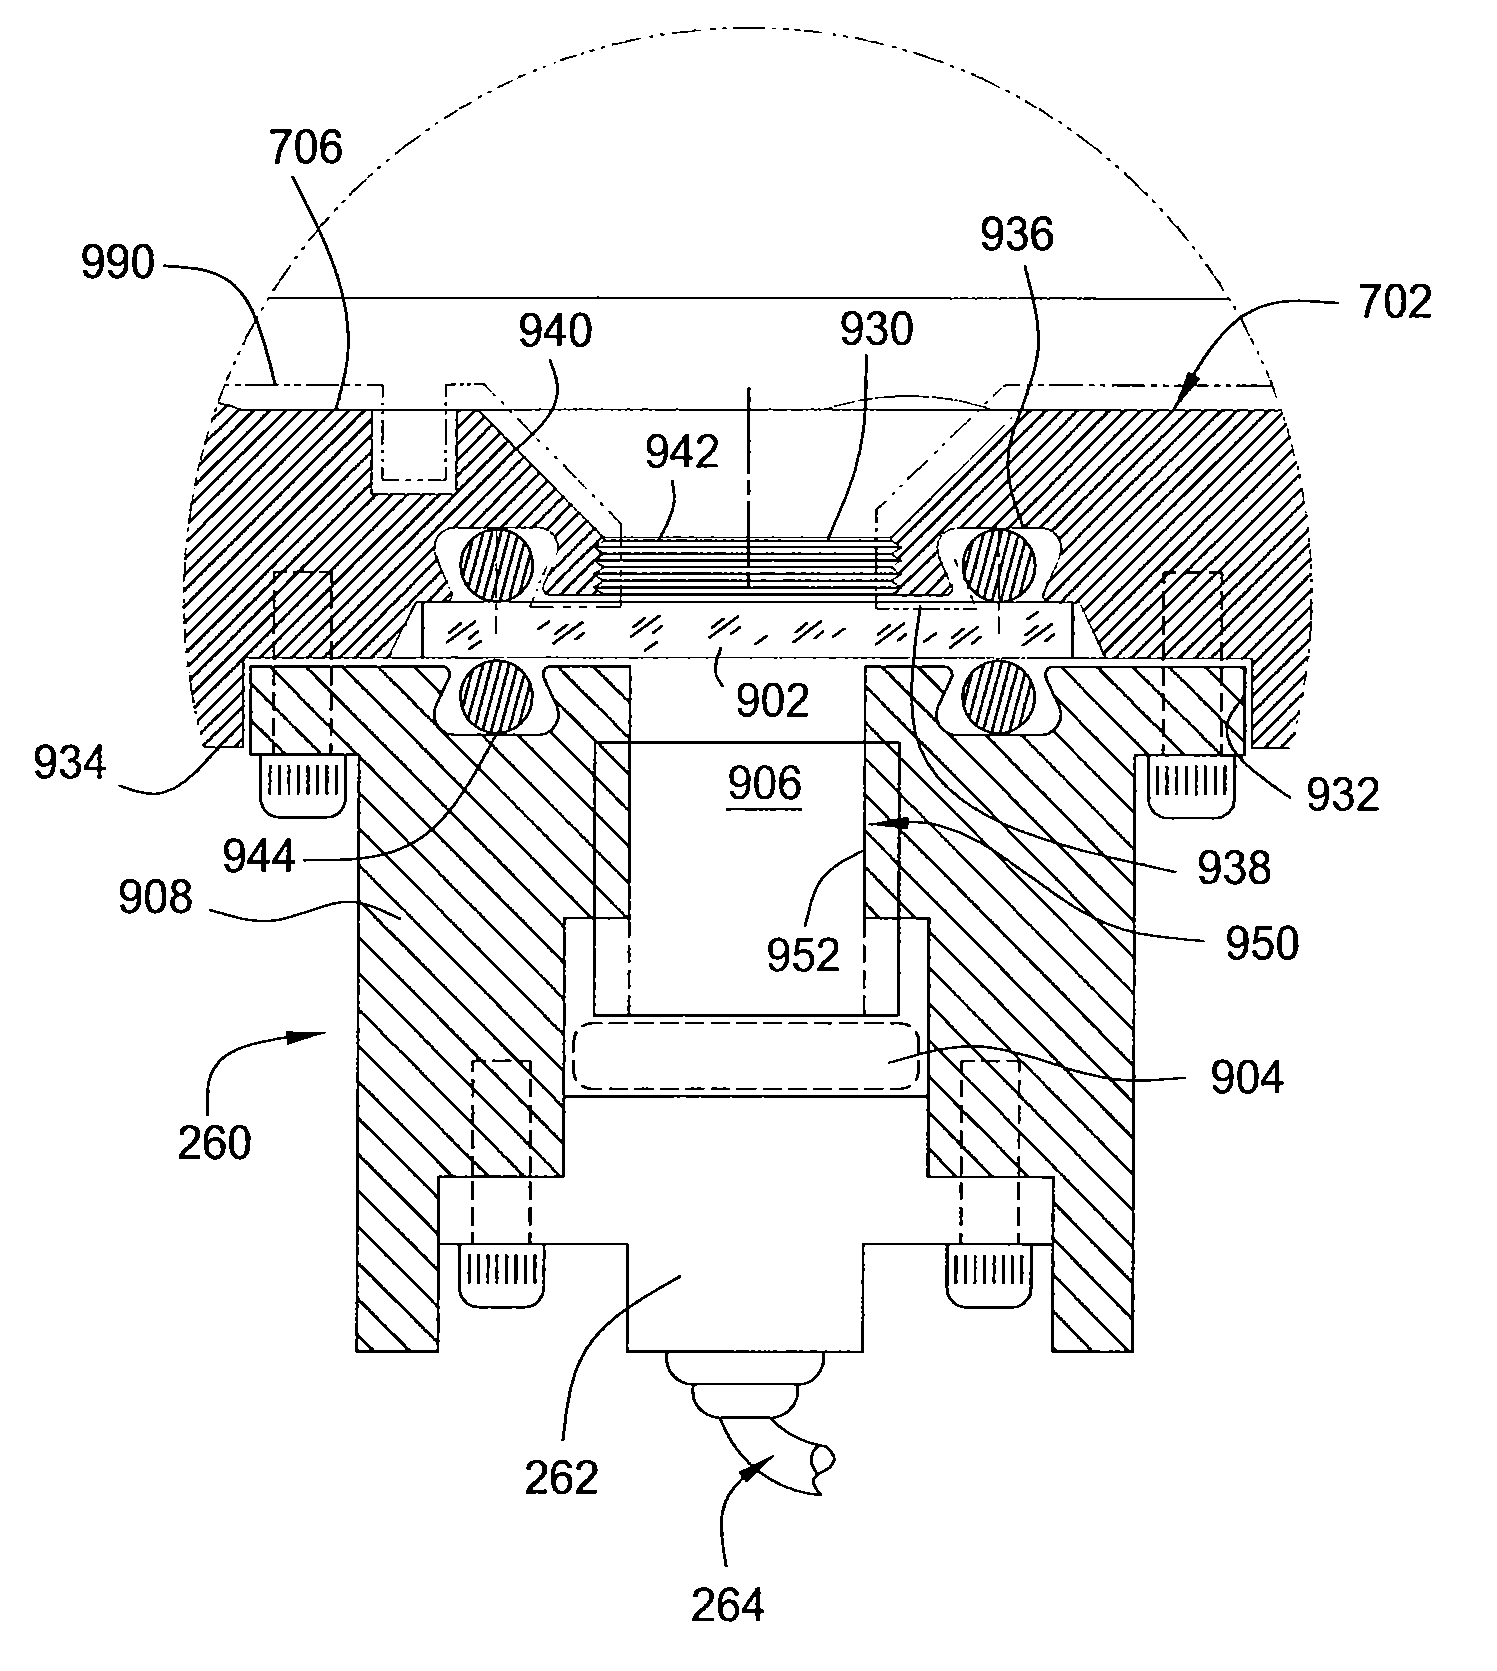 Apparatus for efficient removal of halogen residues from etched substrates